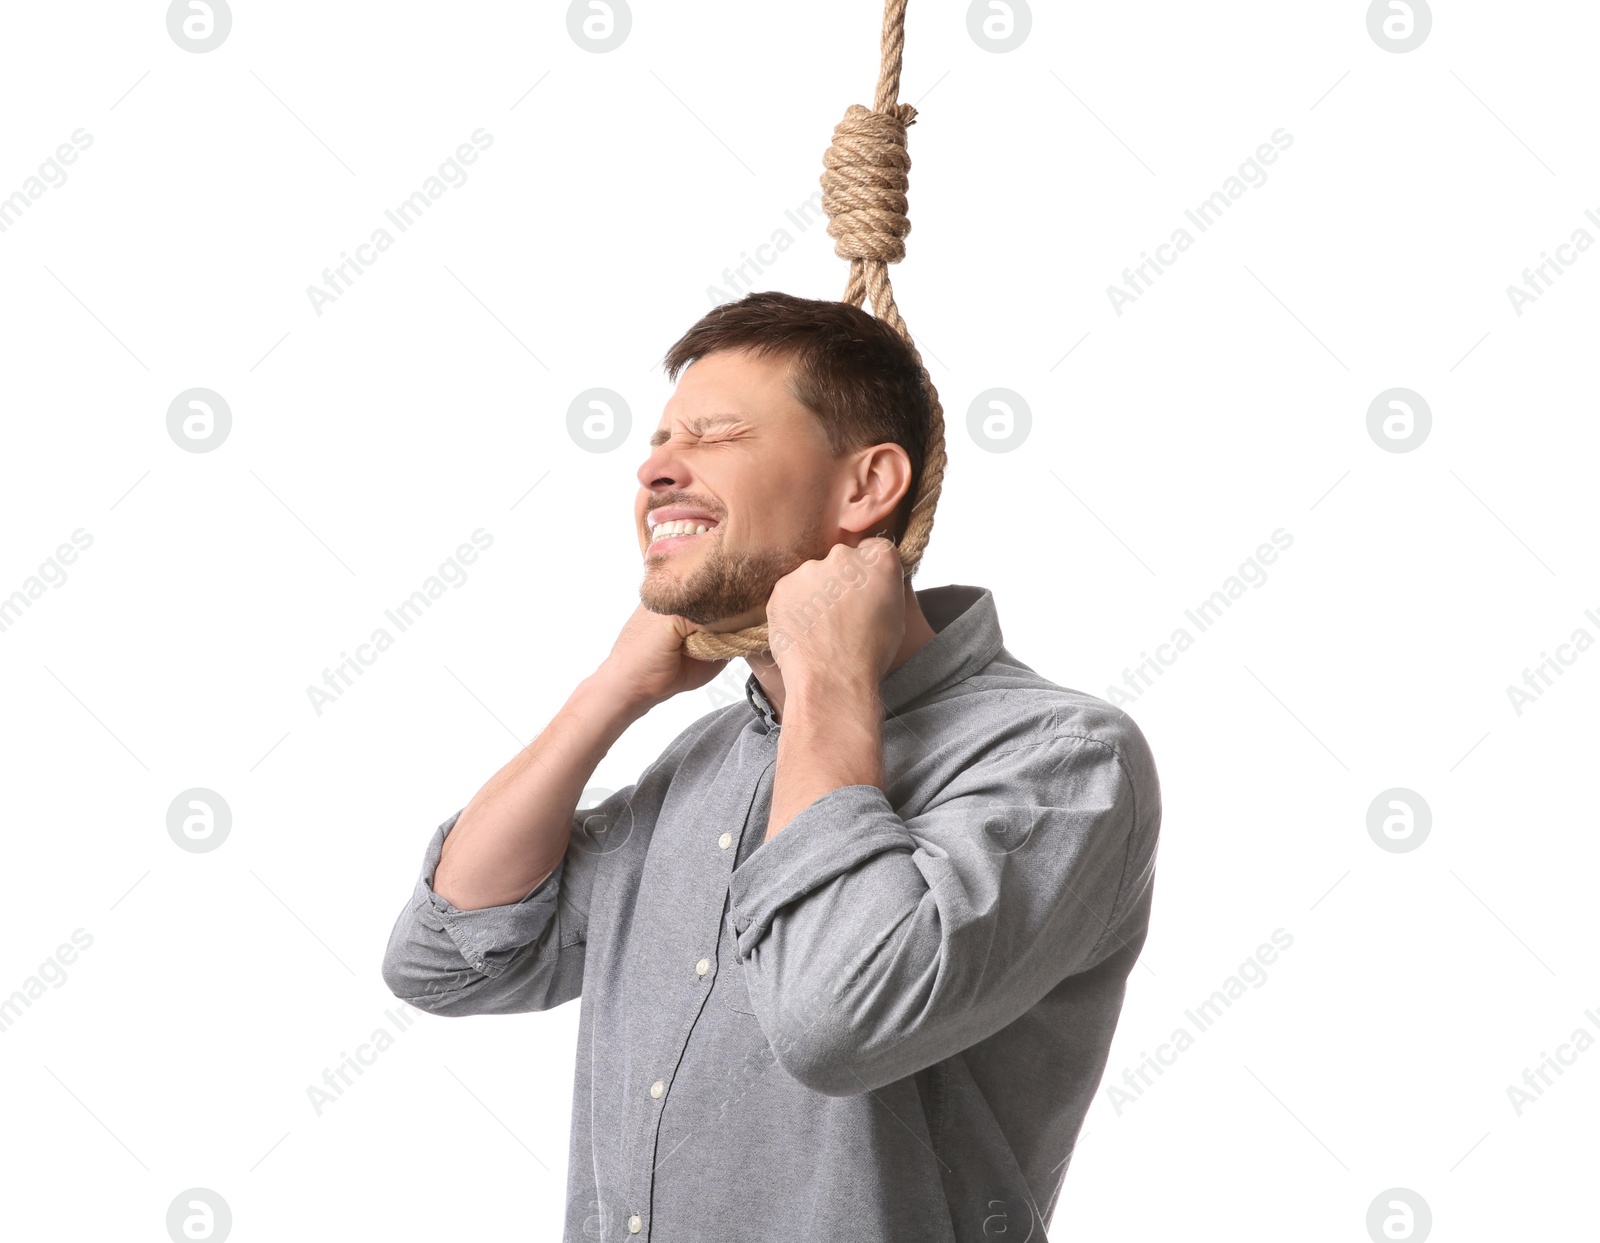 Photo of Depressed man with rope noose on neck against white background